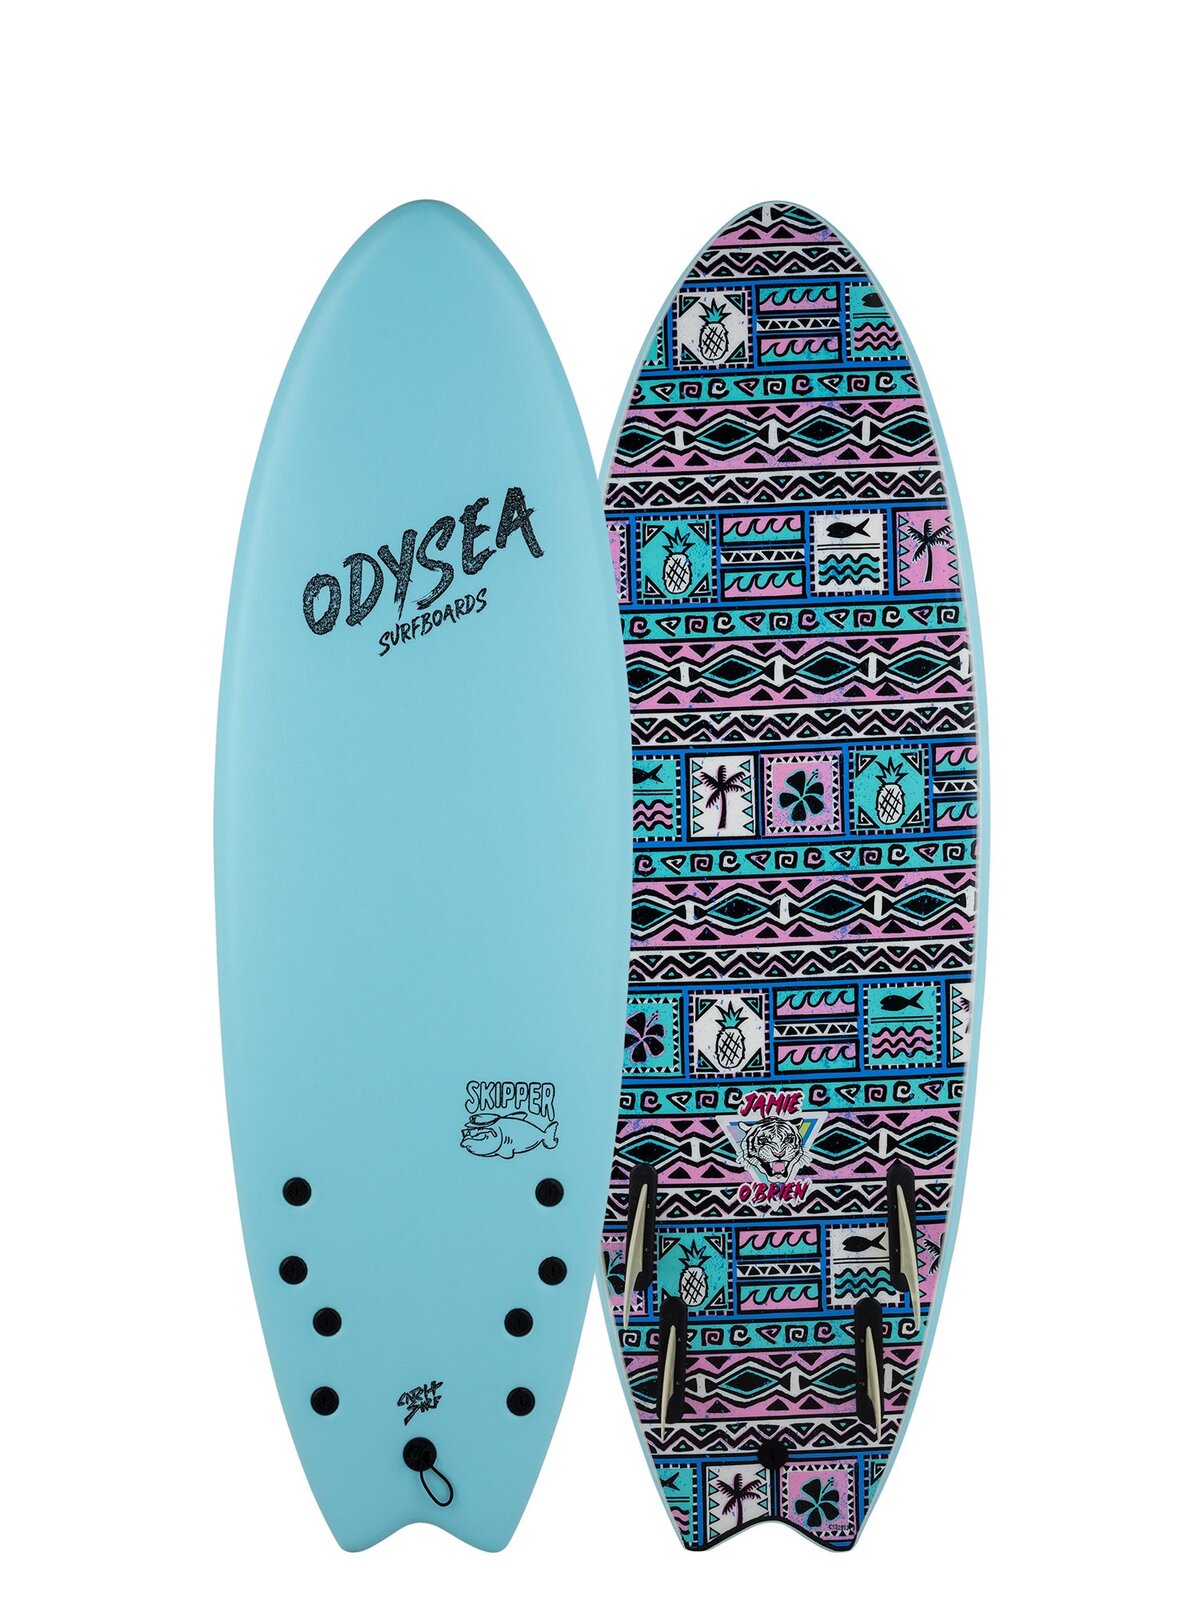 Catch Surf J.O.B PRO Skipper 5'6 Quad. This board is designed for